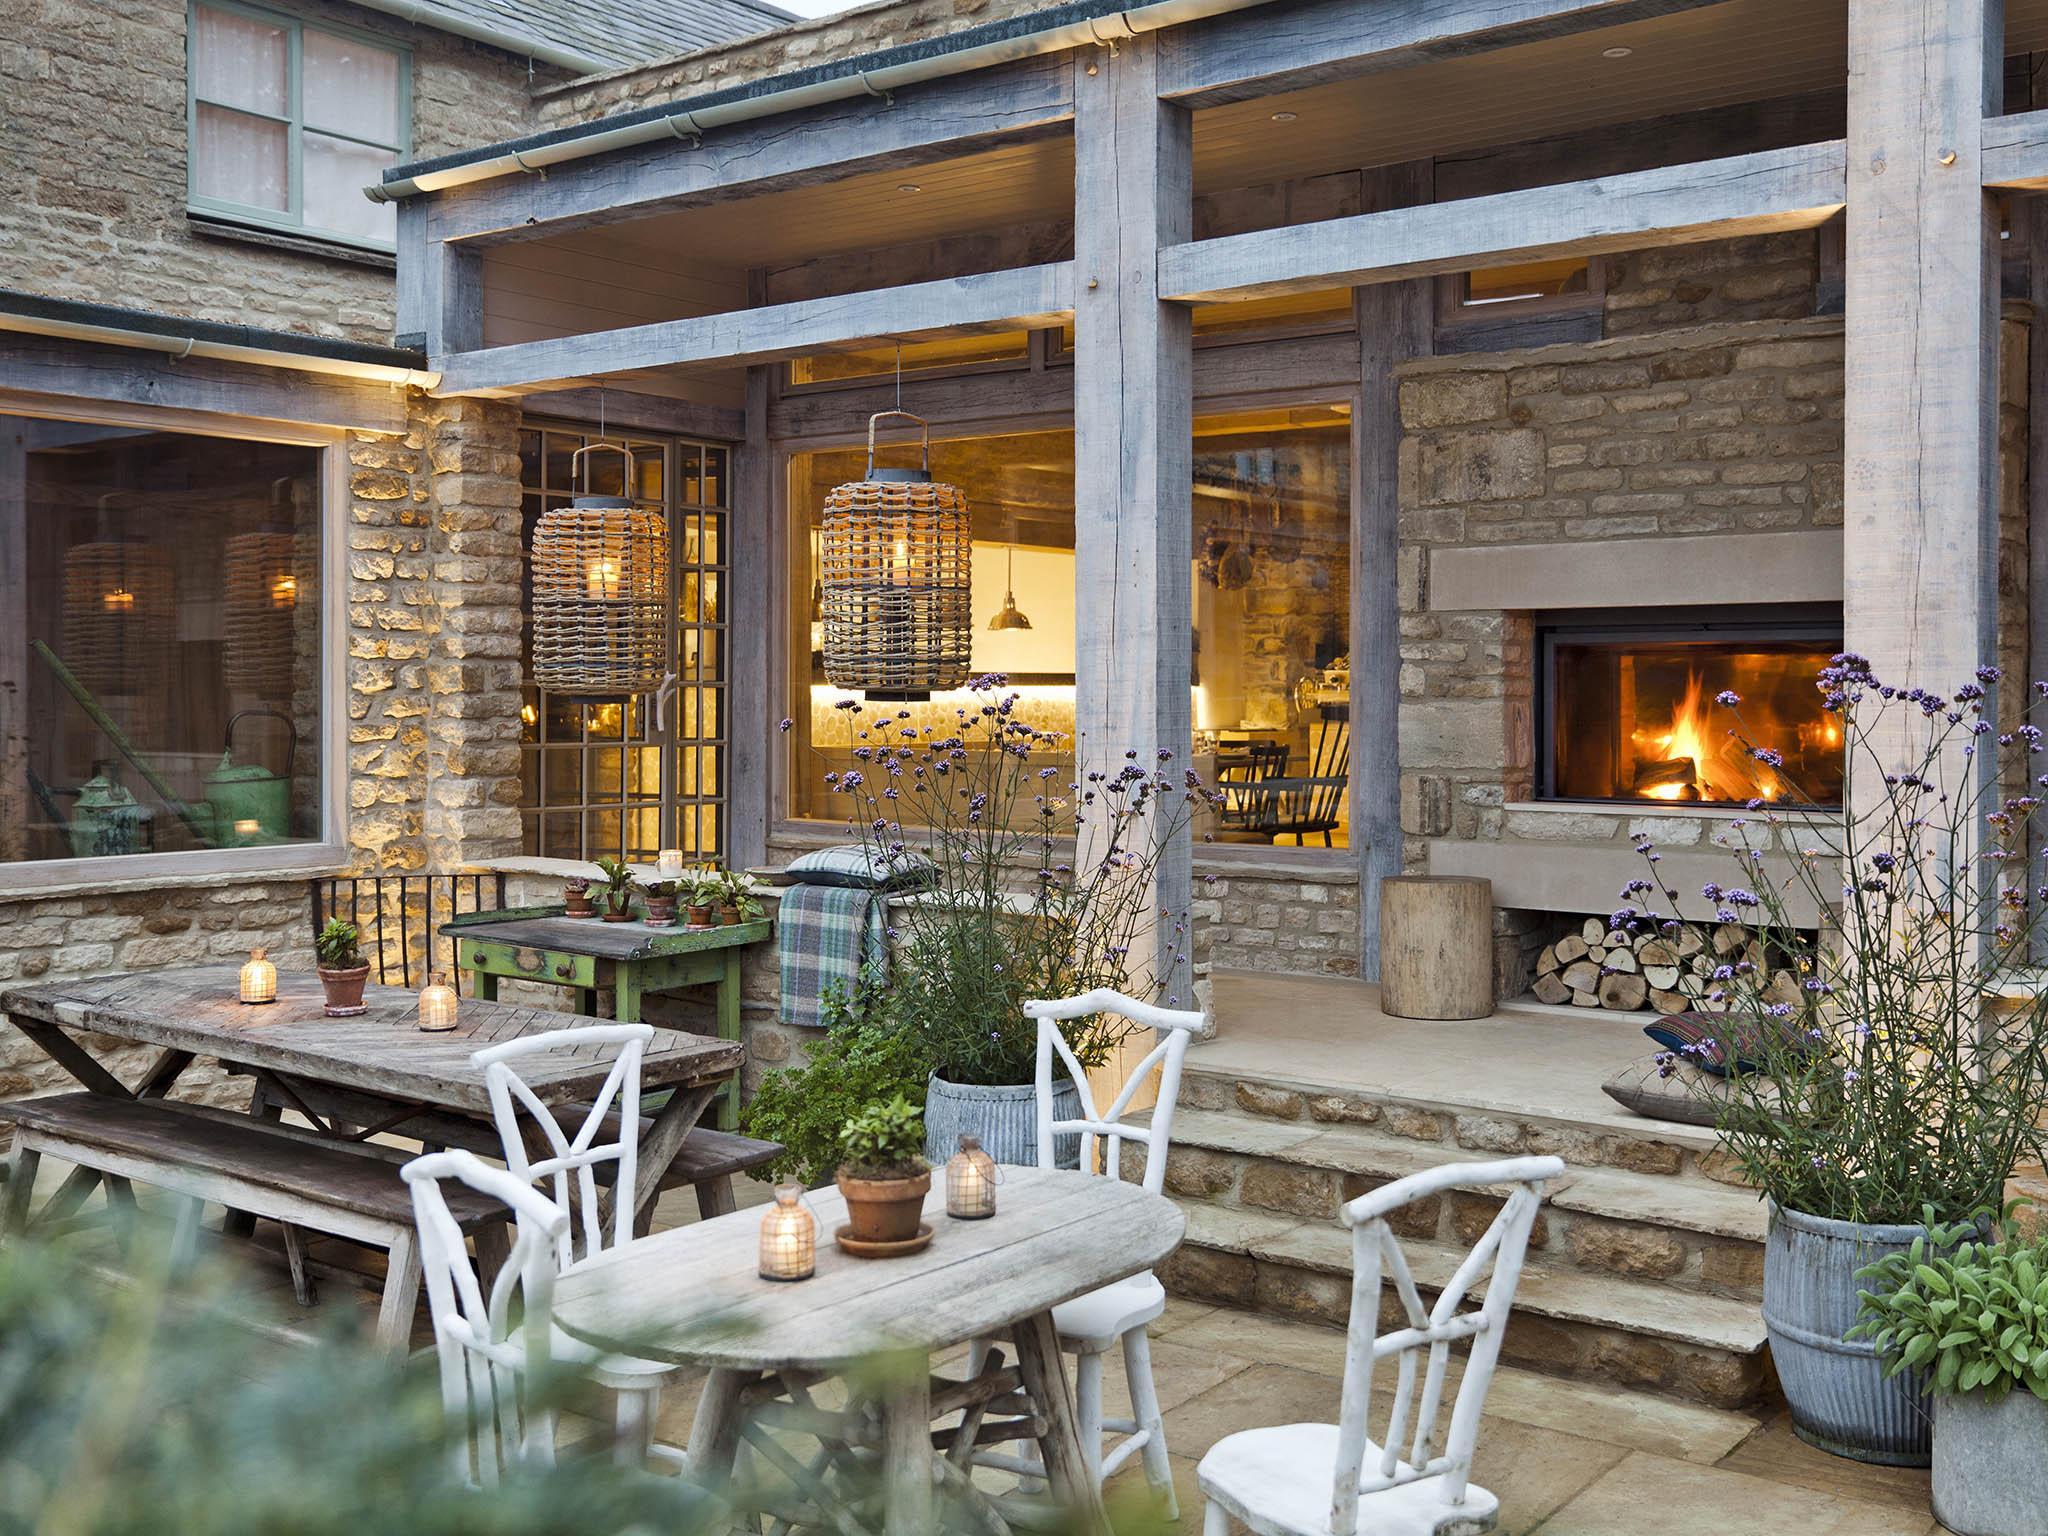 The Wild Rabbit uses homegrown produce from its own garden where possible